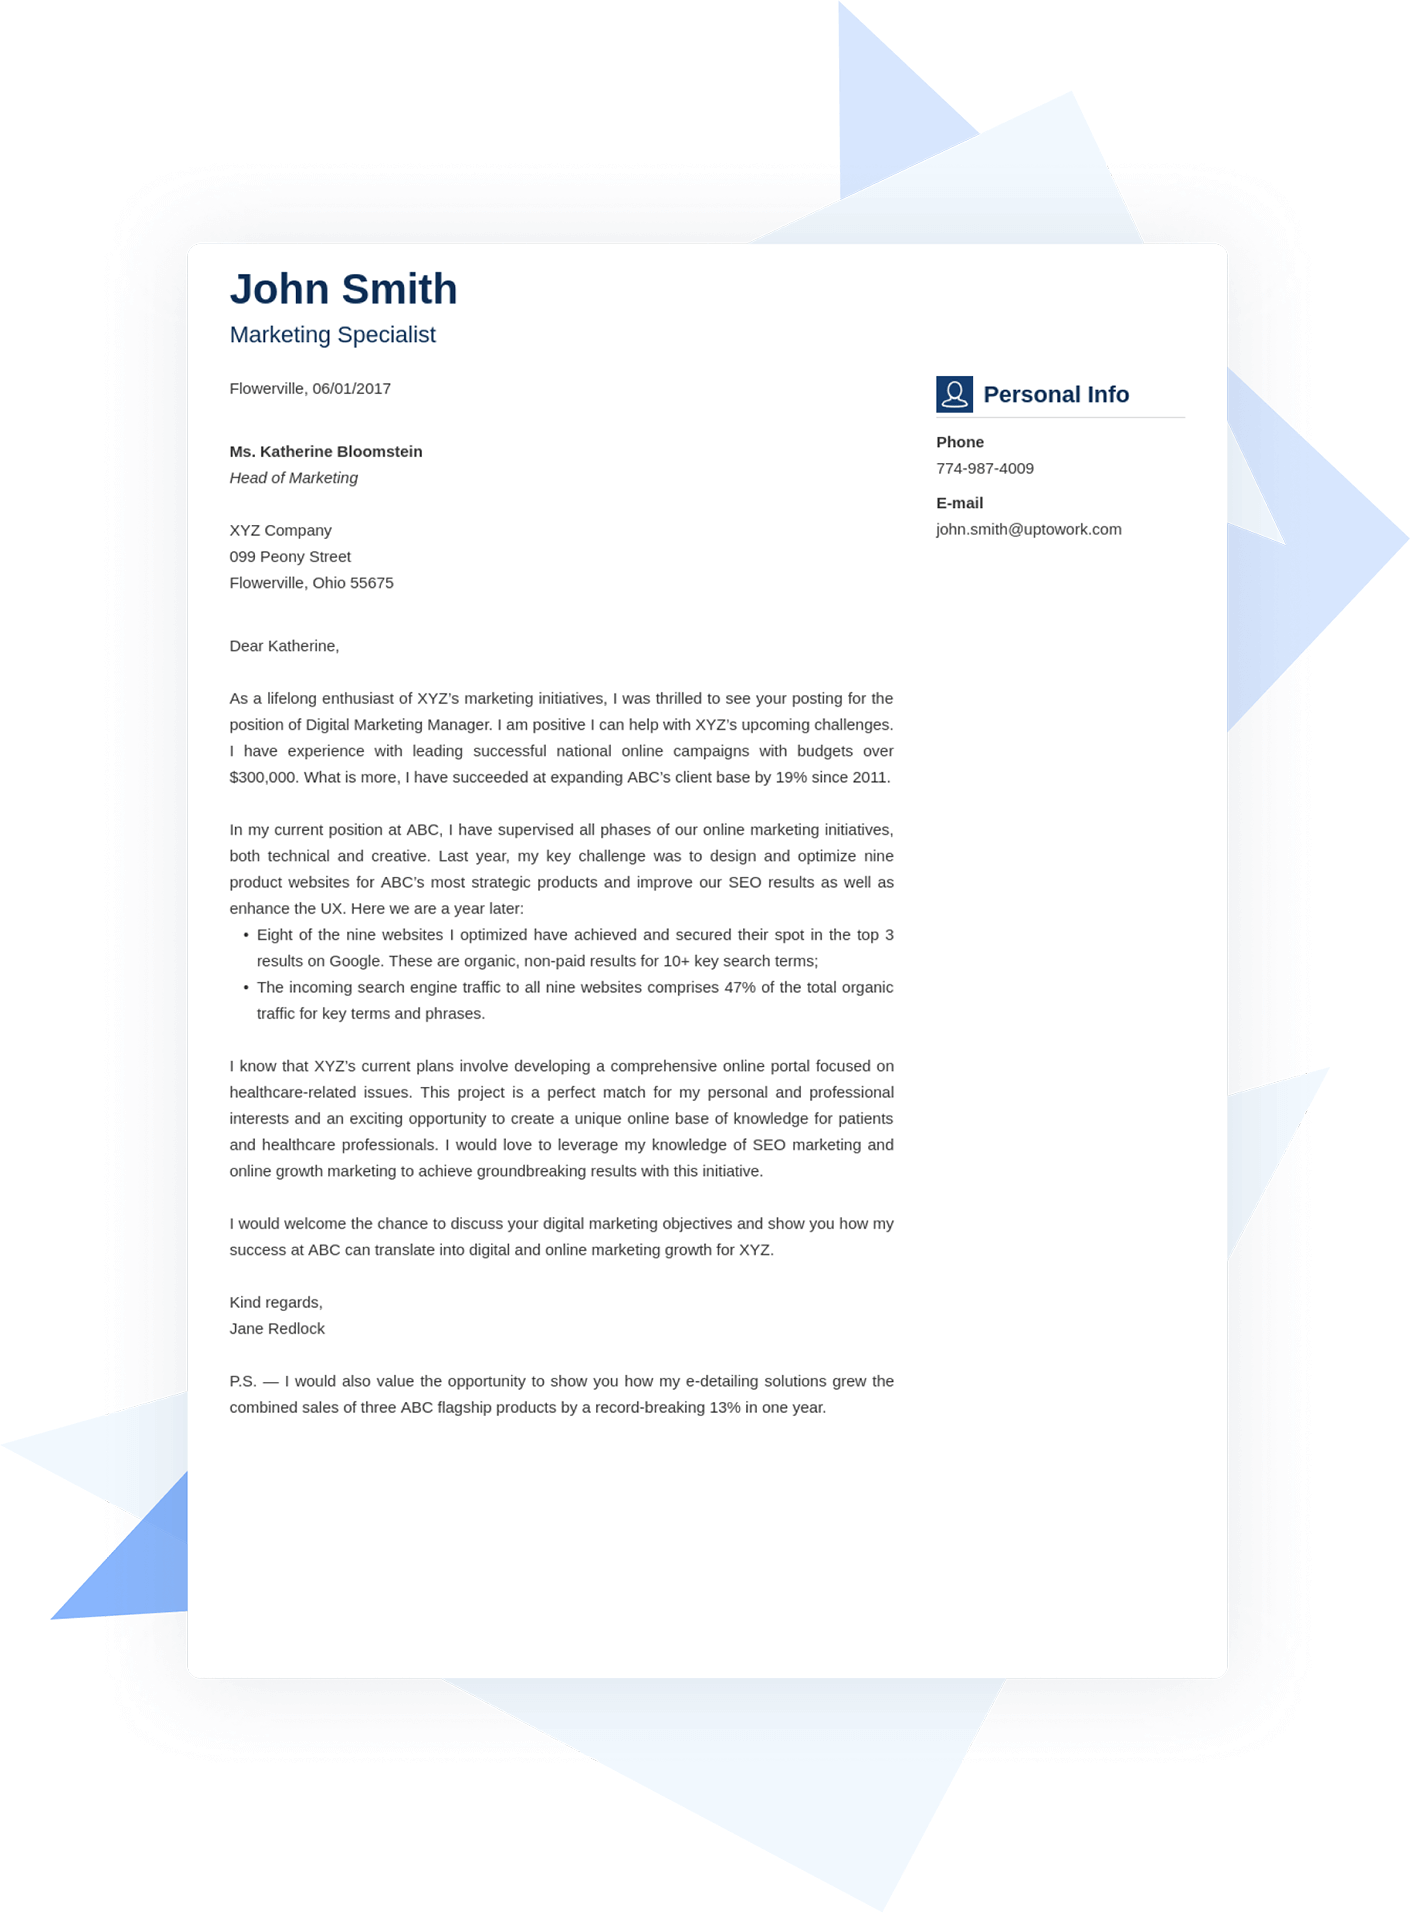 Job Search Cover Letter Examples from cdn-images.zety.com